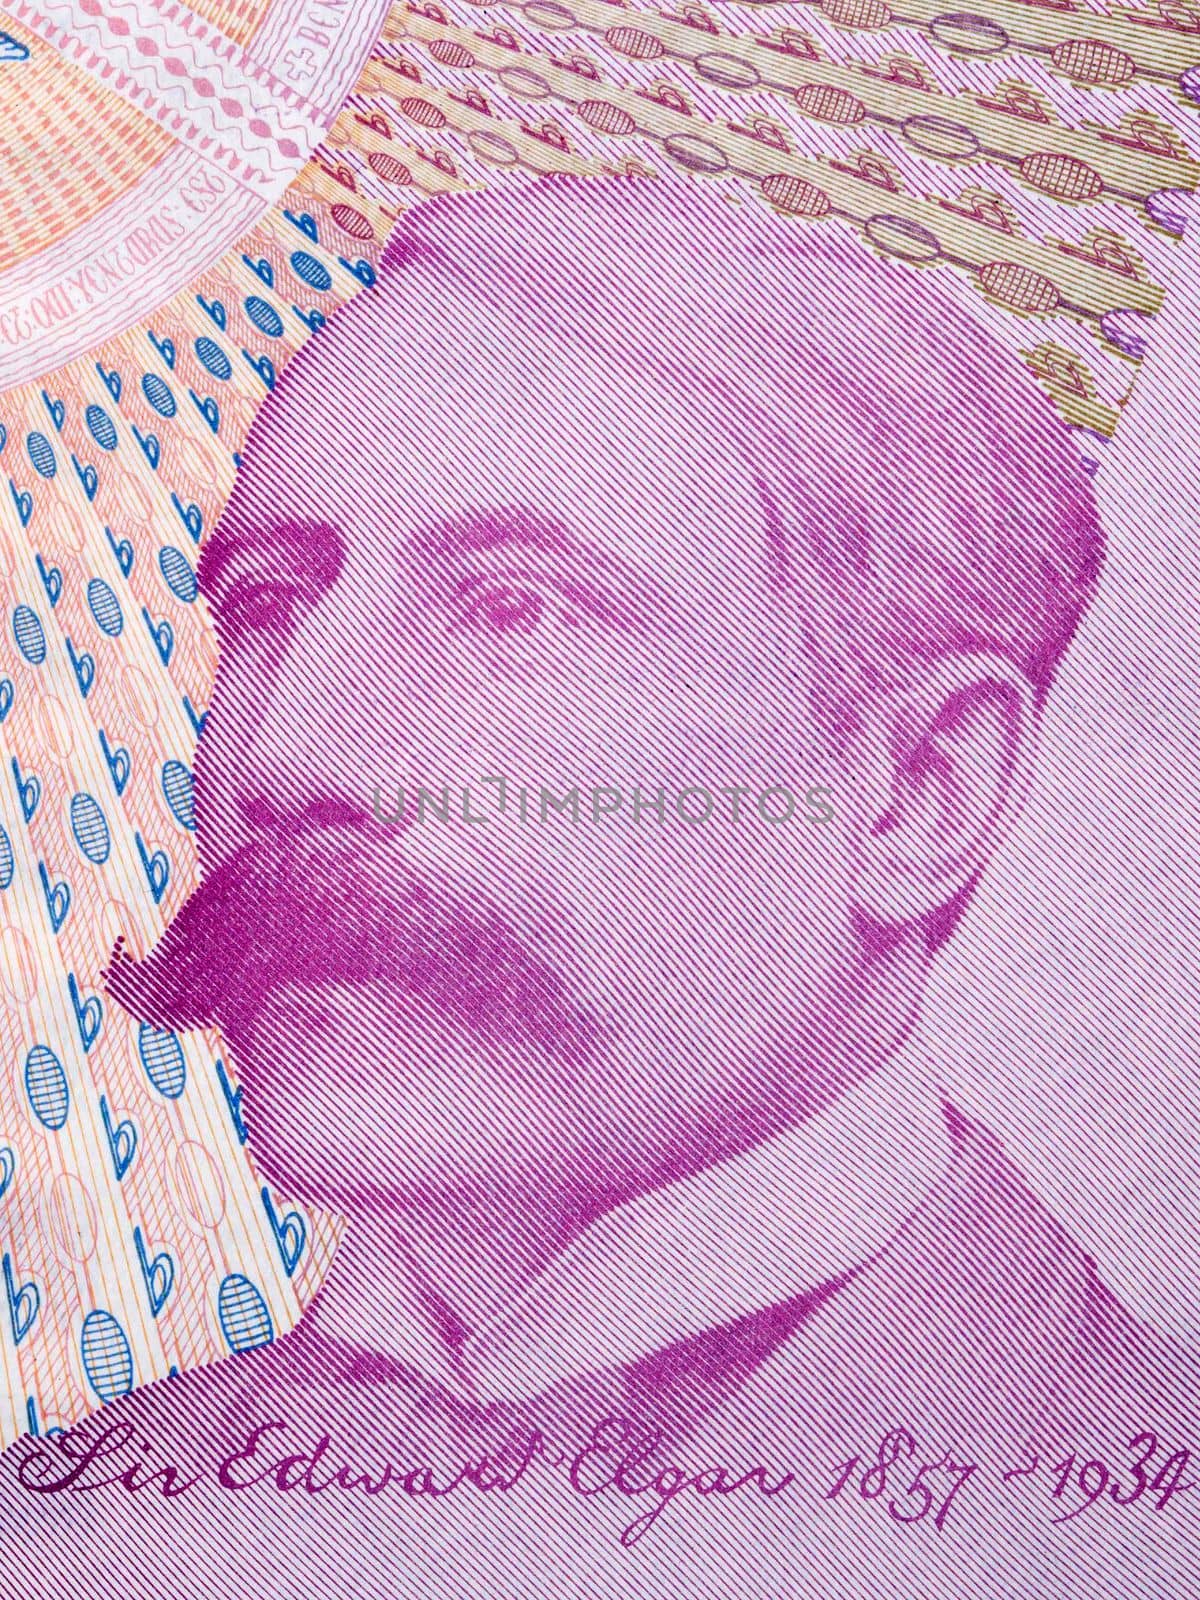 Edward Elgar a portrait from old English money - Pounds